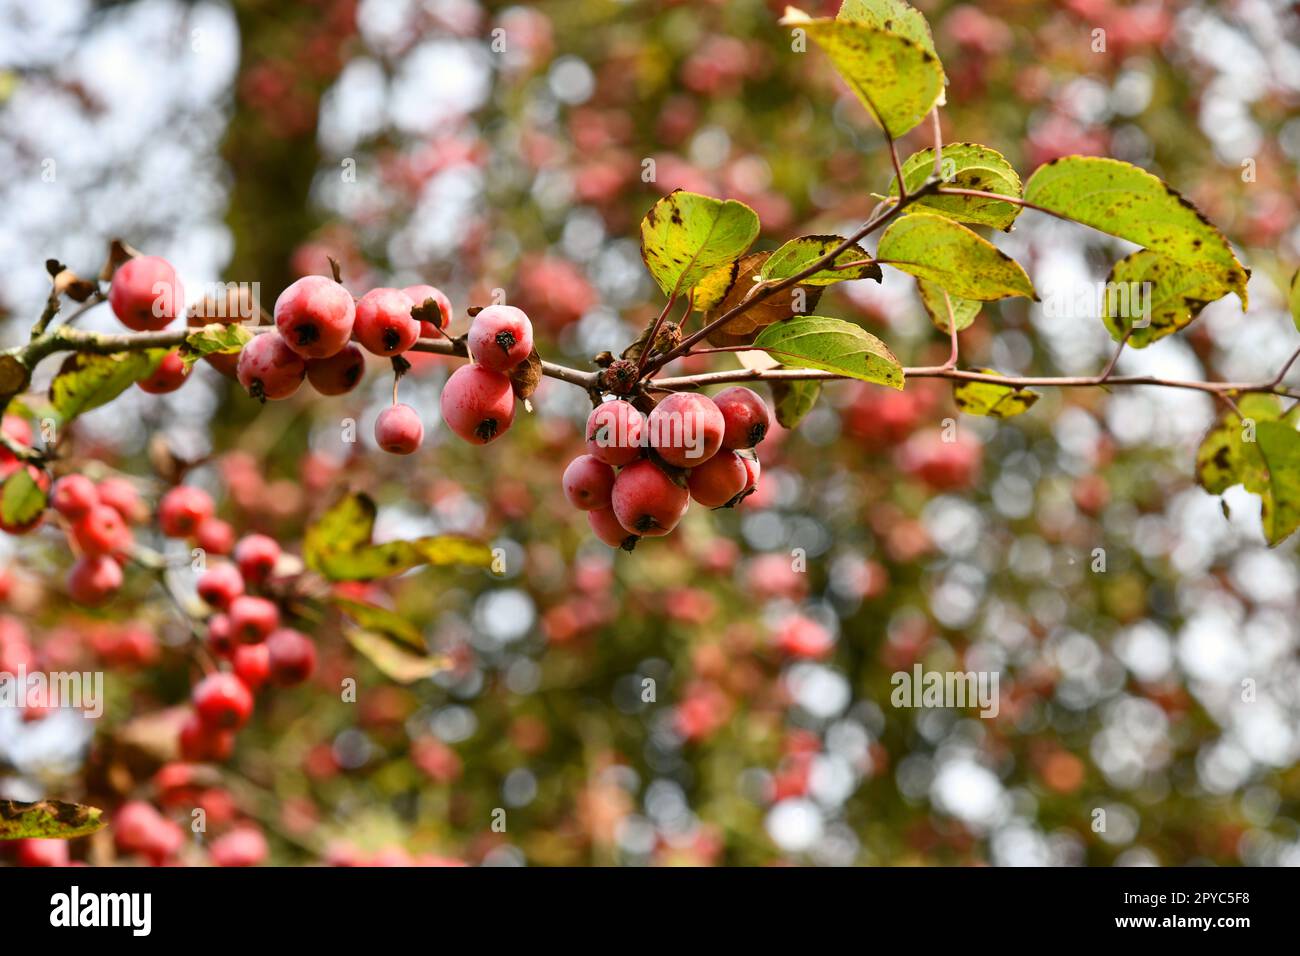 Cherry apple with red fruits- Malus baccata Stock Photo